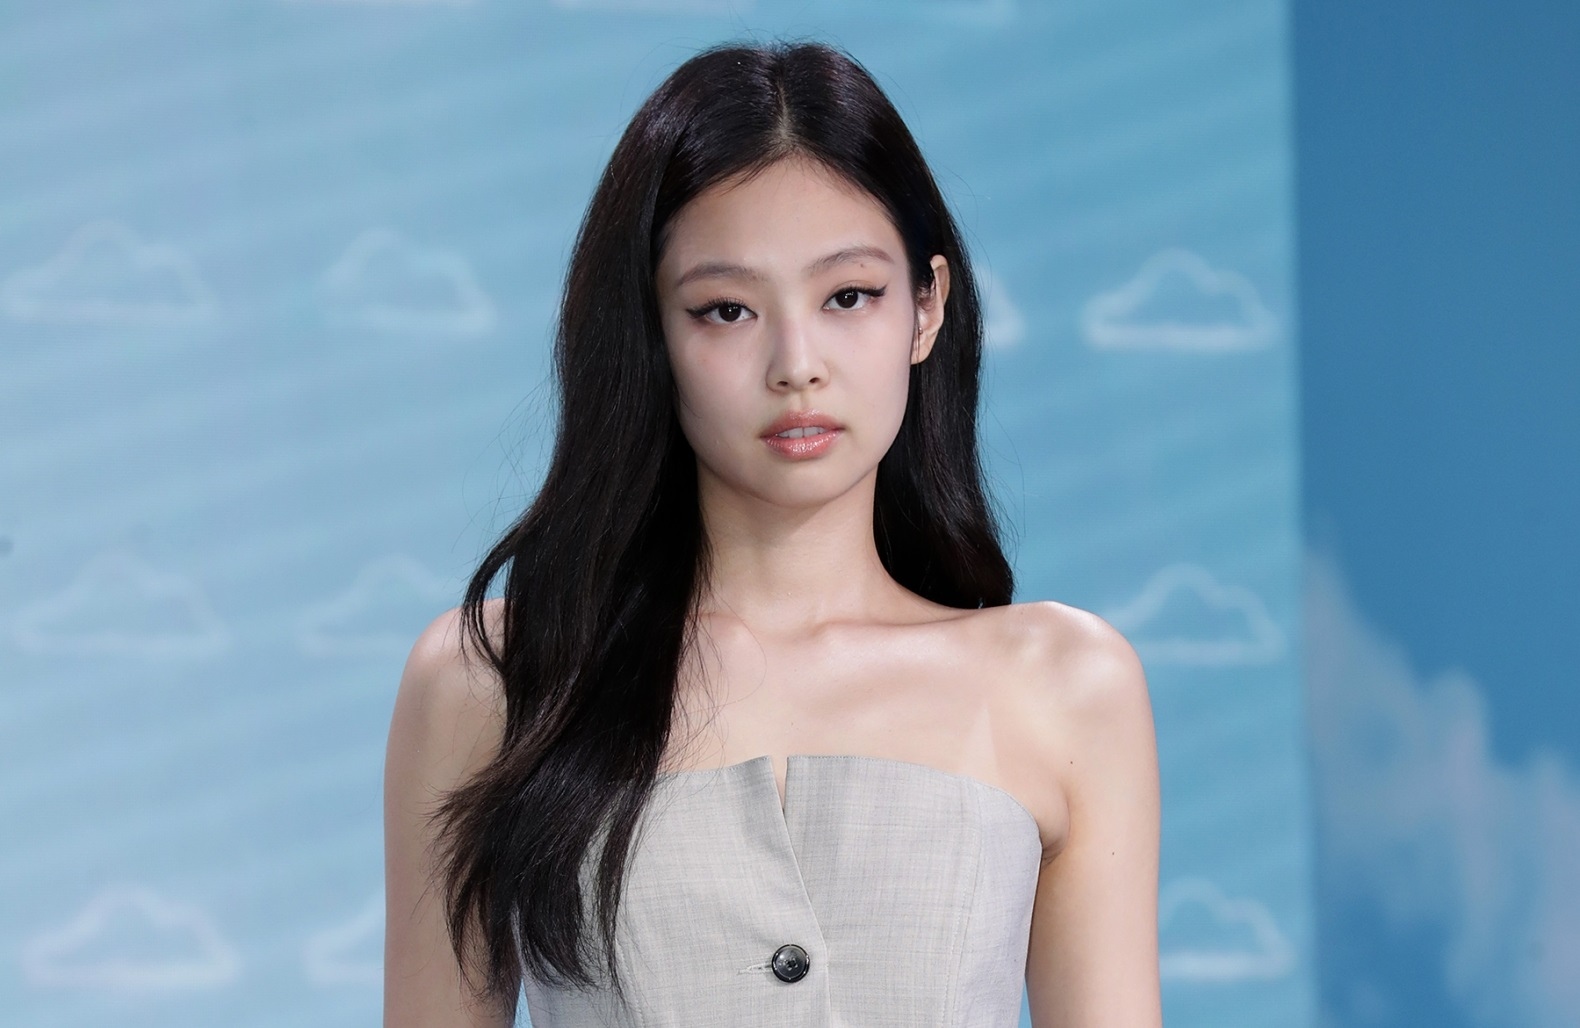 Jennie member of the group Blackpink leaves the stage during a concert due to health problems